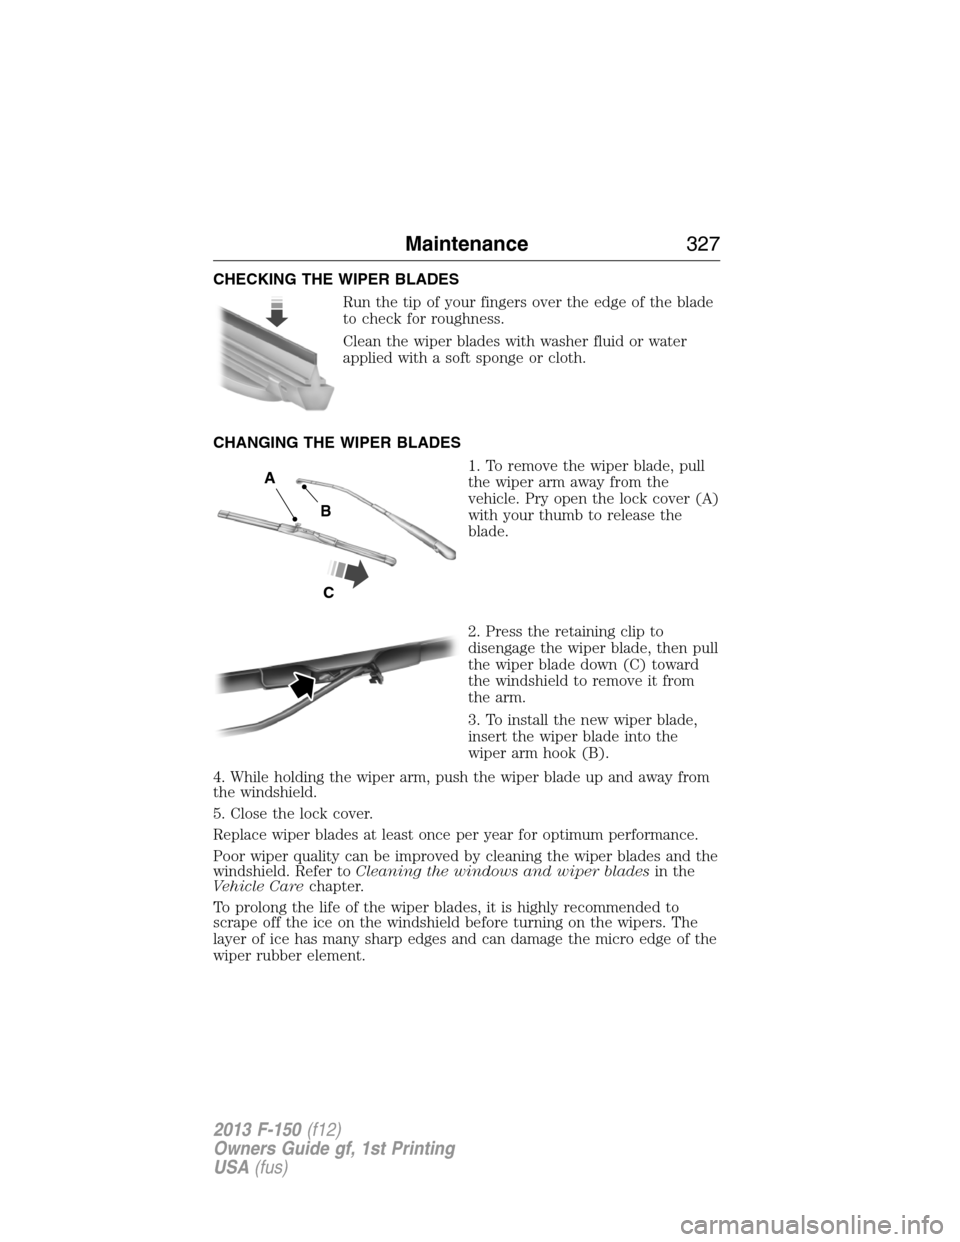 FORD F150 2013 12.G Service Manual CHECKING THE WIPER BLADES
Run the tip of your fingers over the edge of the blade
to check for roughness.
Clean the wiper blades with washer fluid or water
applied with a soft sponge or cloth.
CHANGING